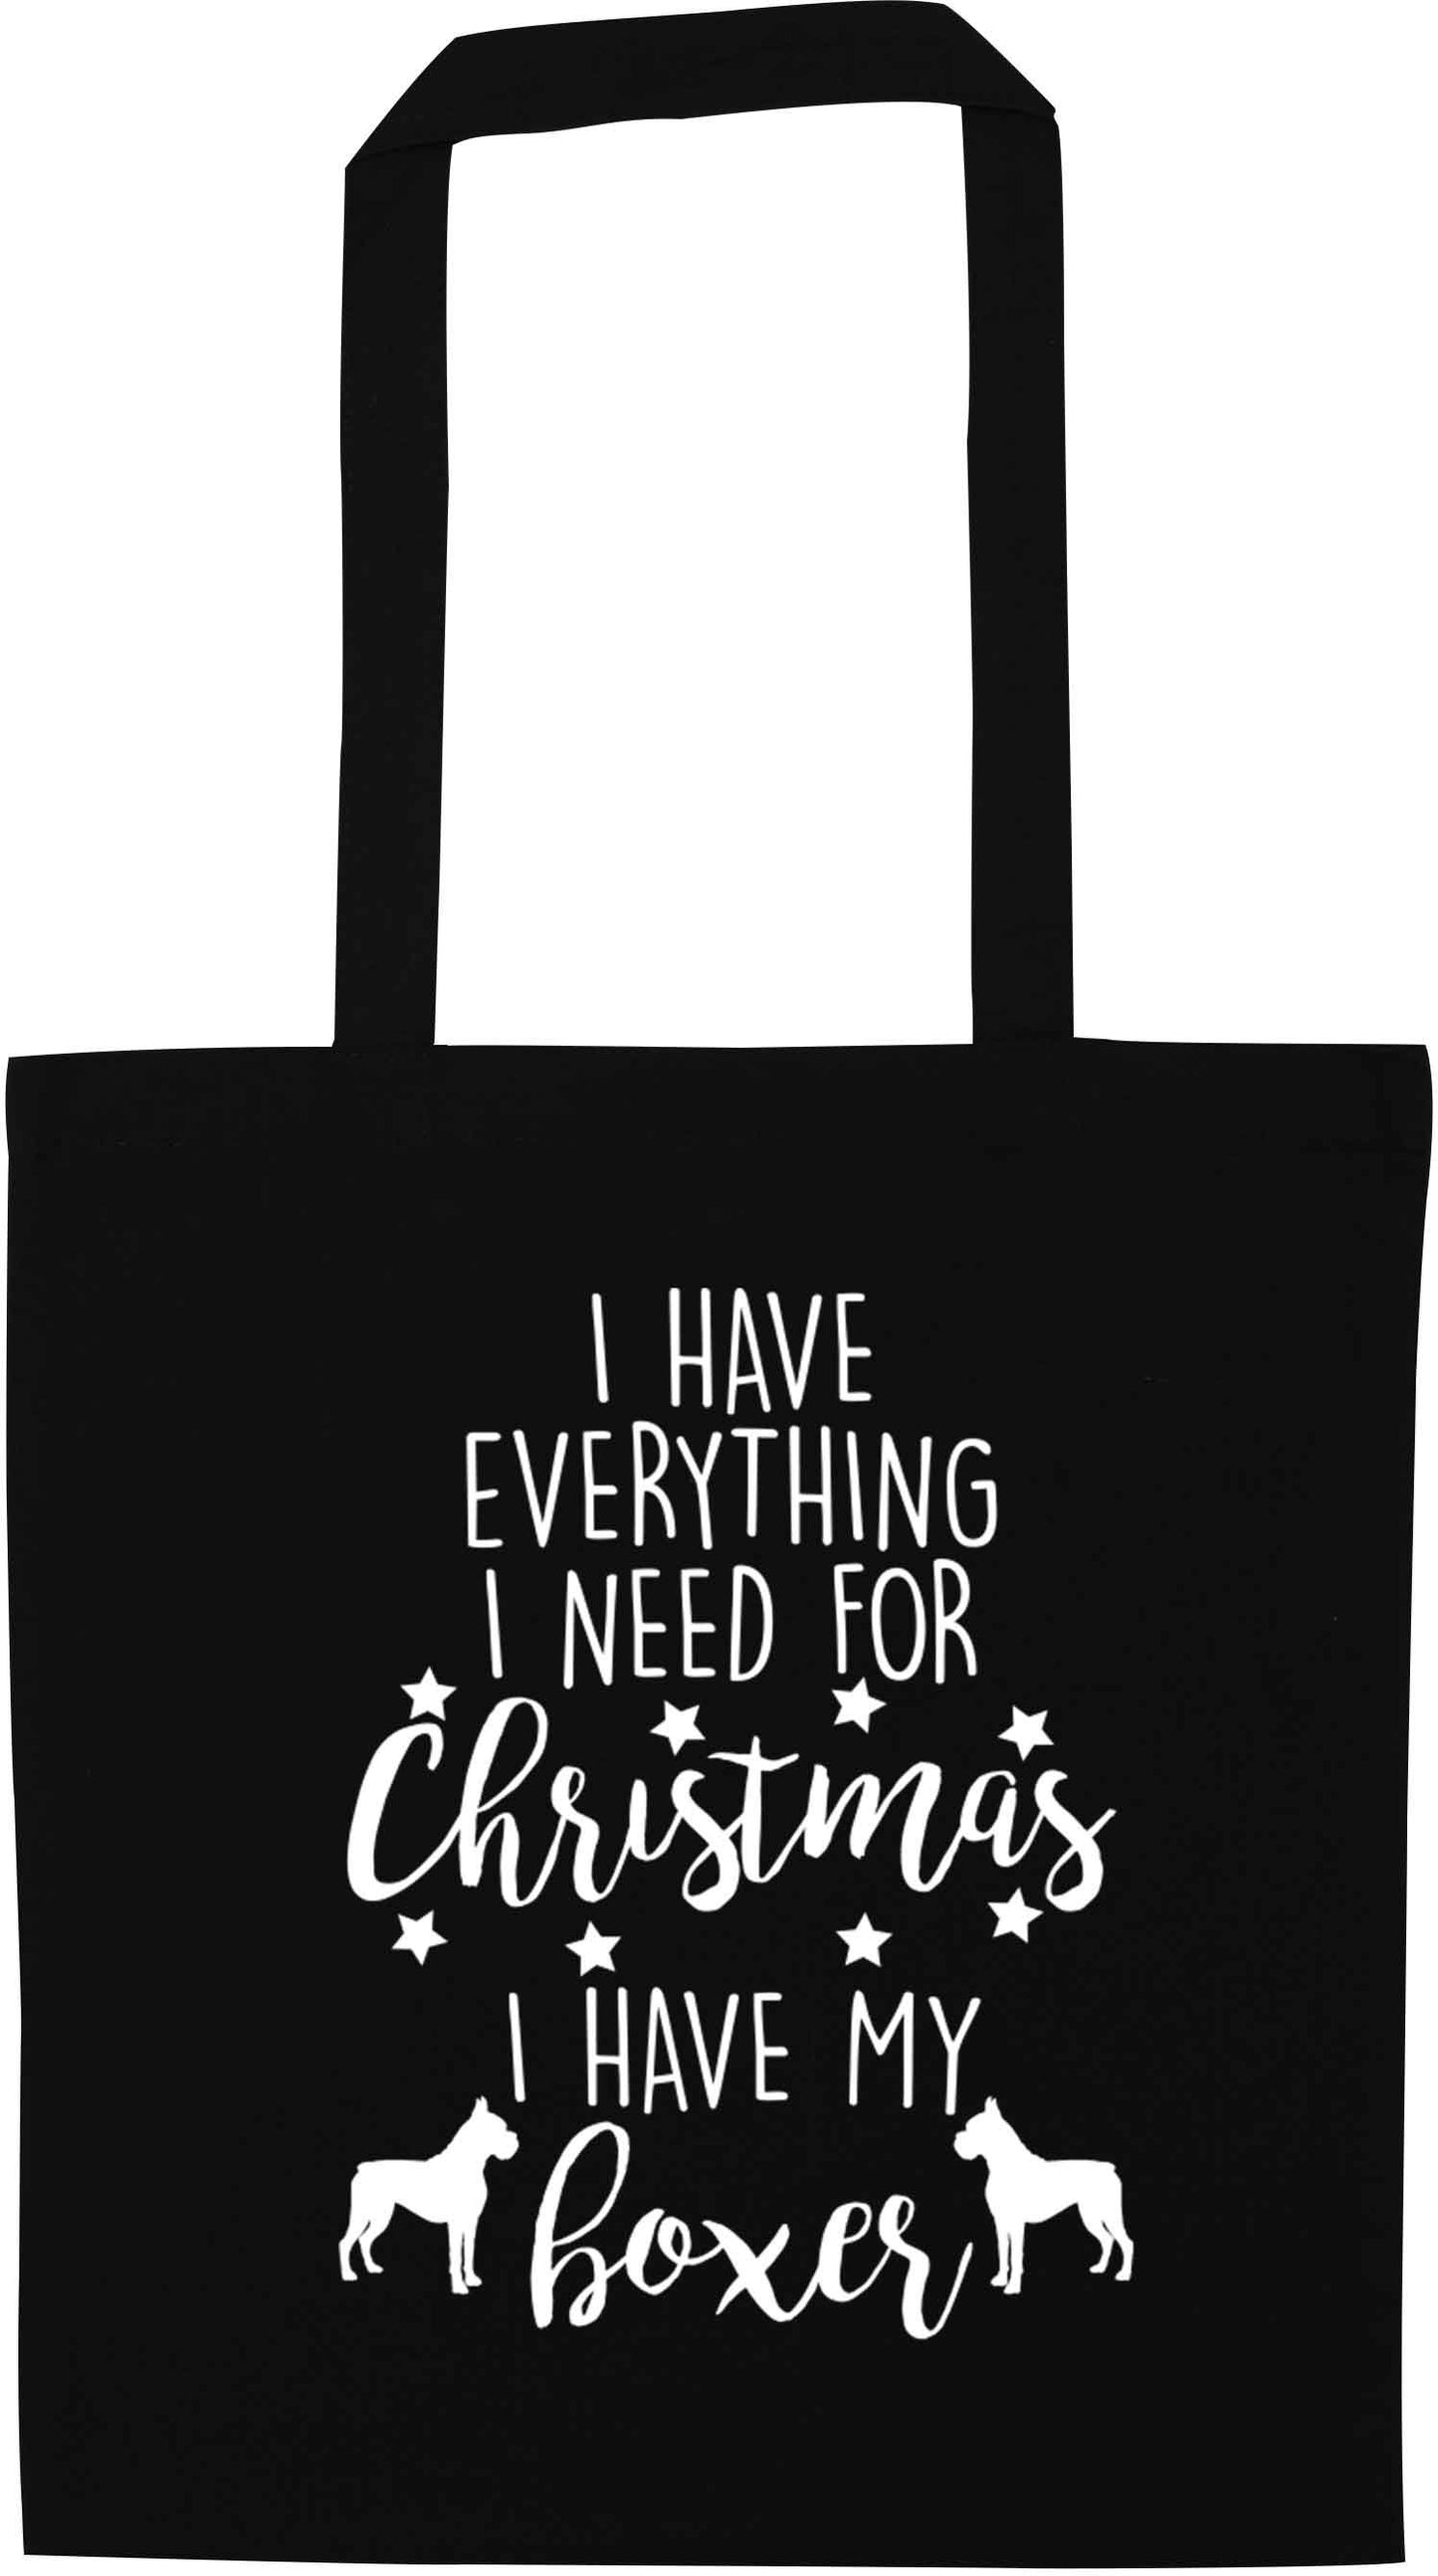 I have everything I need for Christmas I have my boxer black tote bag